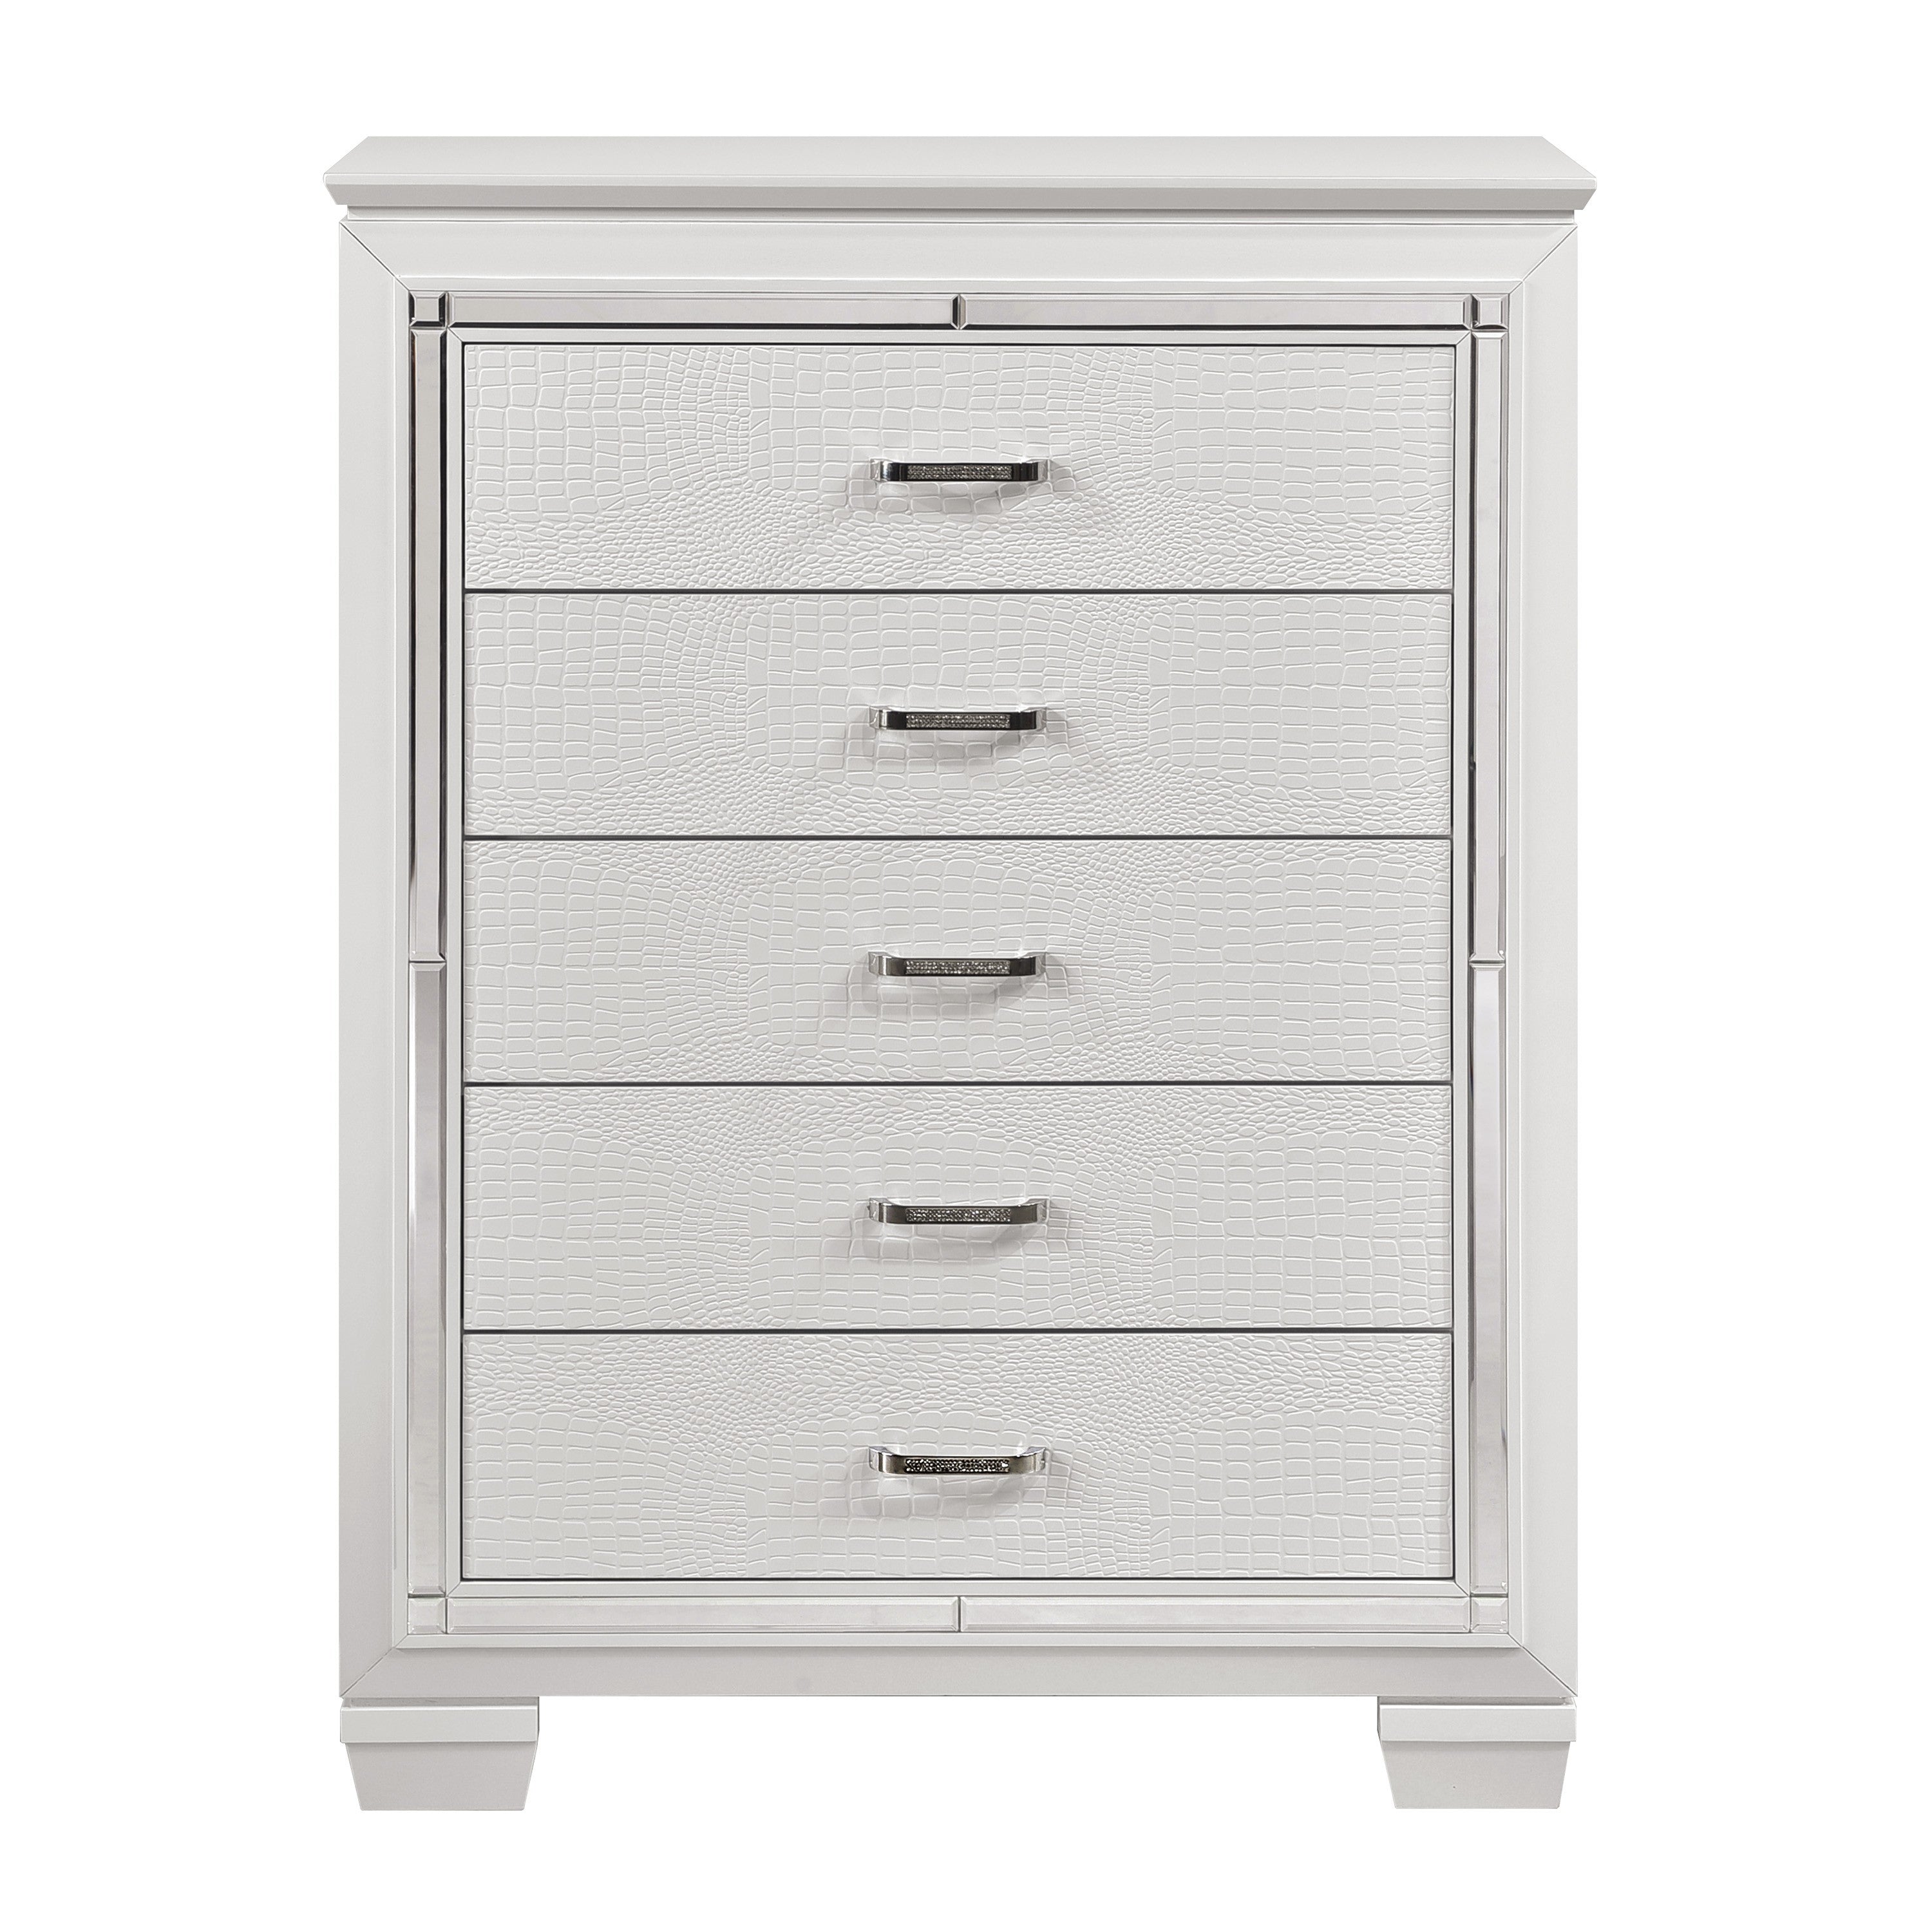 Allura White LED Upholstered Panel Youth Bedroom Set - SET | 1916FW-1 | 1916FW-2 | 1916FW-3 | 1916W-5 | 1916W-6 | 1916W-4 | 1916W-9 - Bien Home Furniture &amp; Electronics